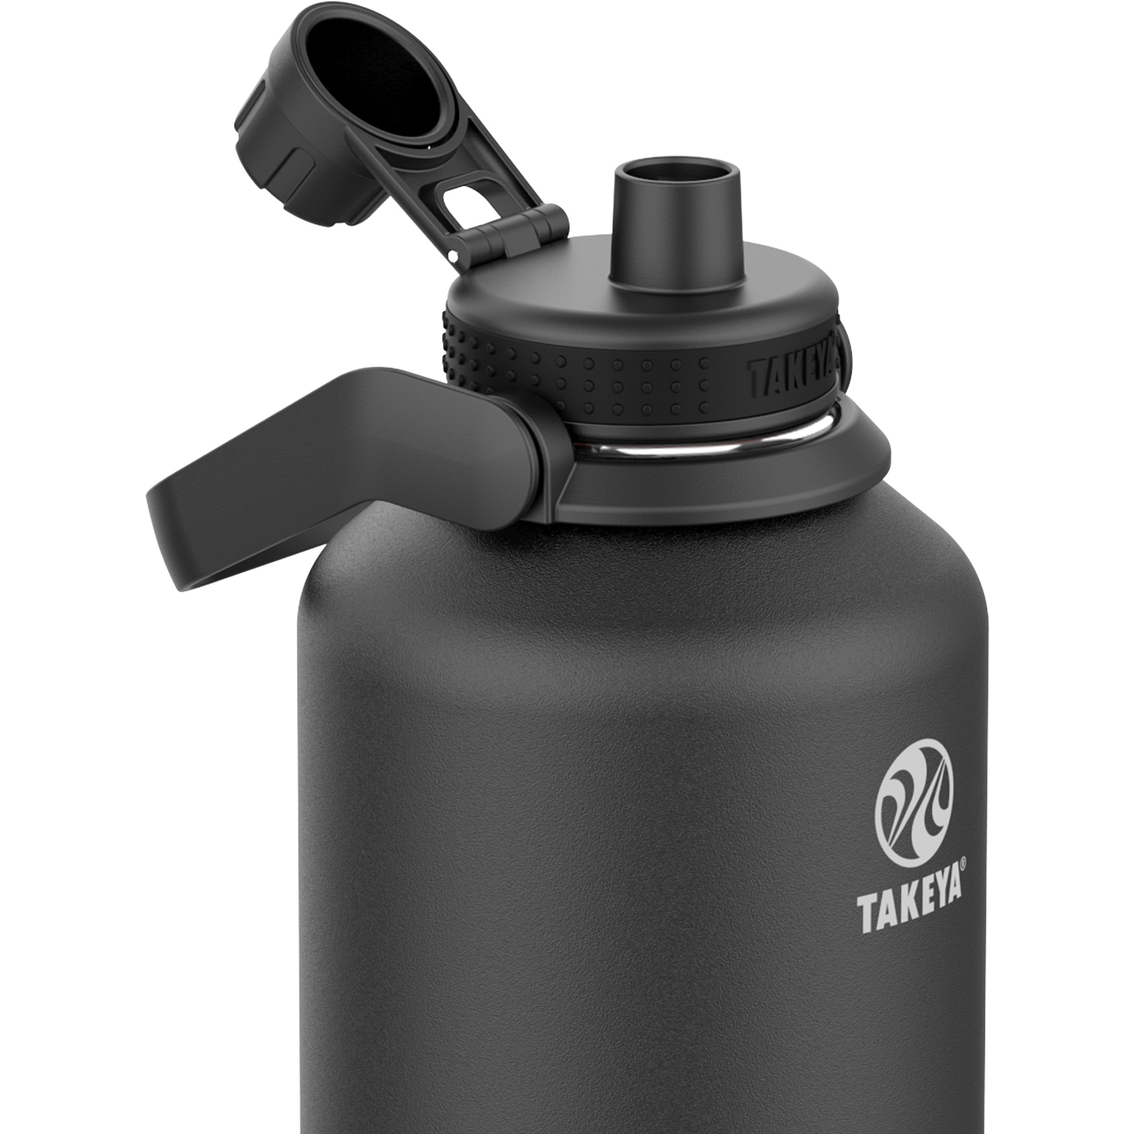 Takeya Actives Insulated Stainless Steel Water Bottle with Spout Lid 64 oz. - Image 2 of 2